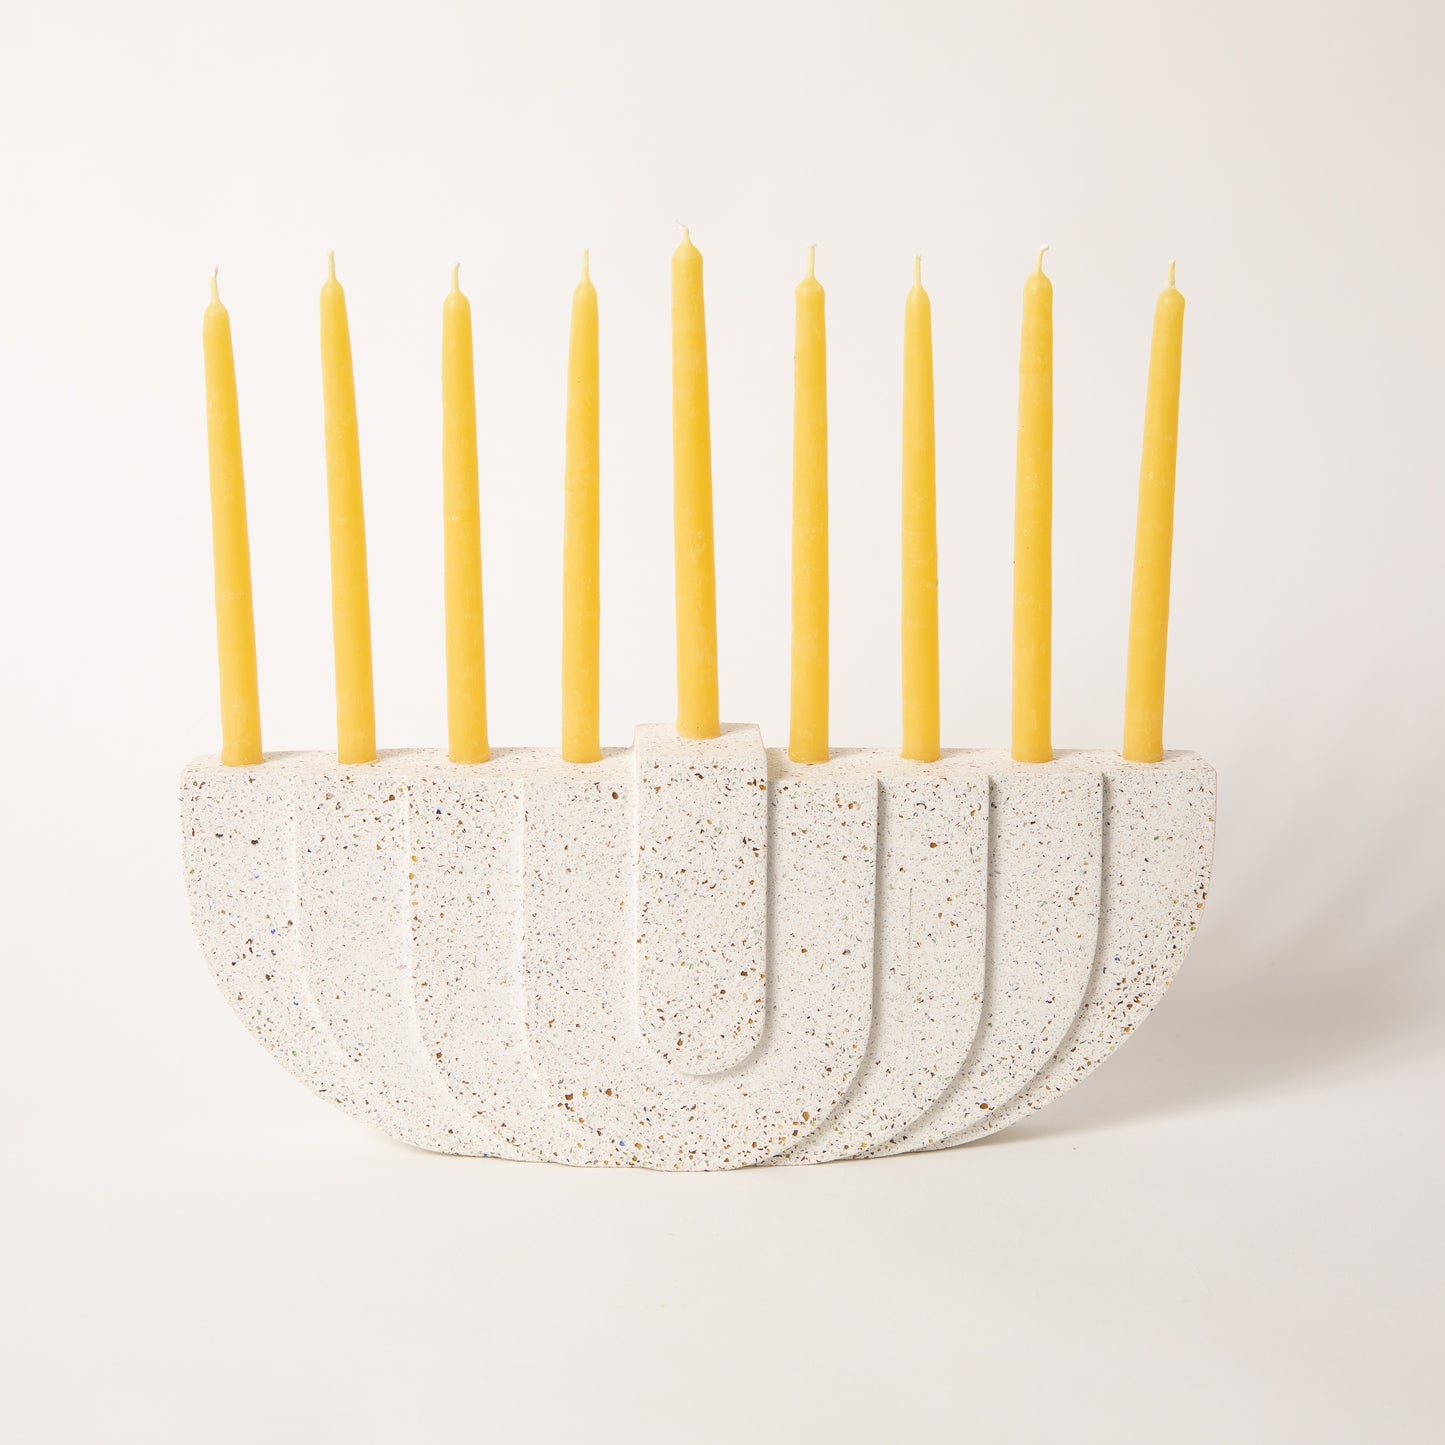 Concrete terrazzo menorah in white with candles.